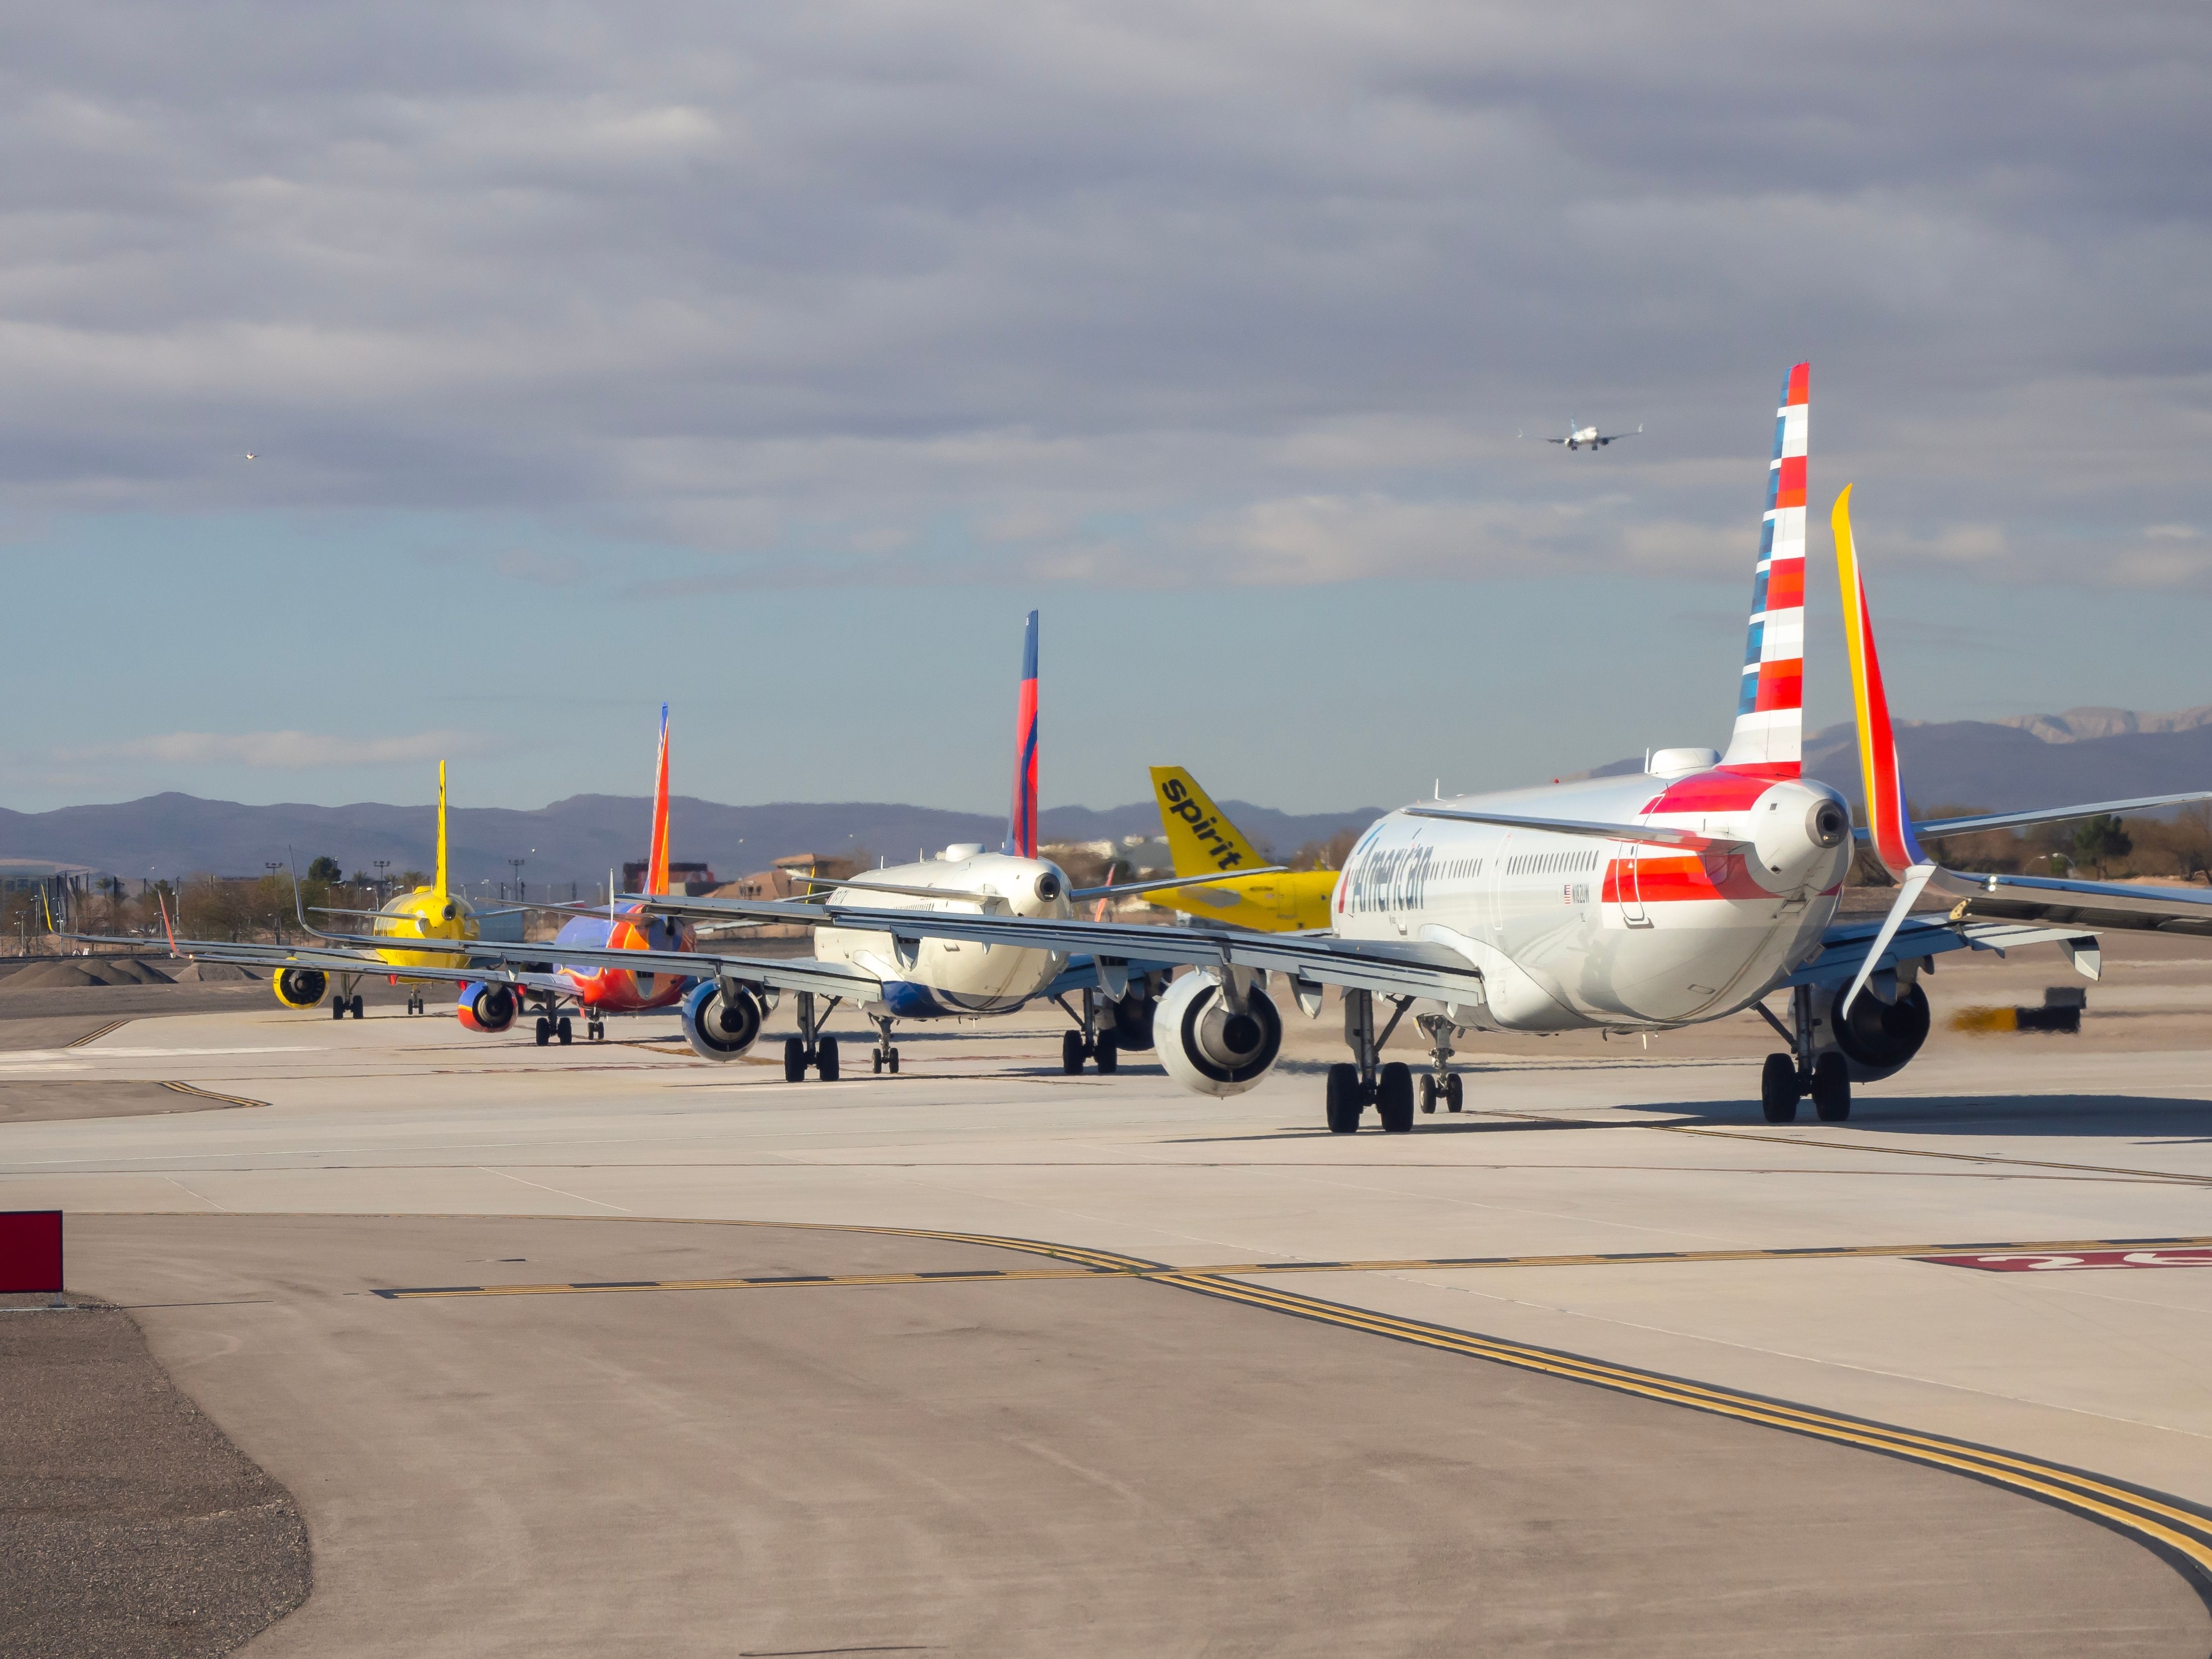 Many planes in line waiting to take off at Harry Reid International Airport. 